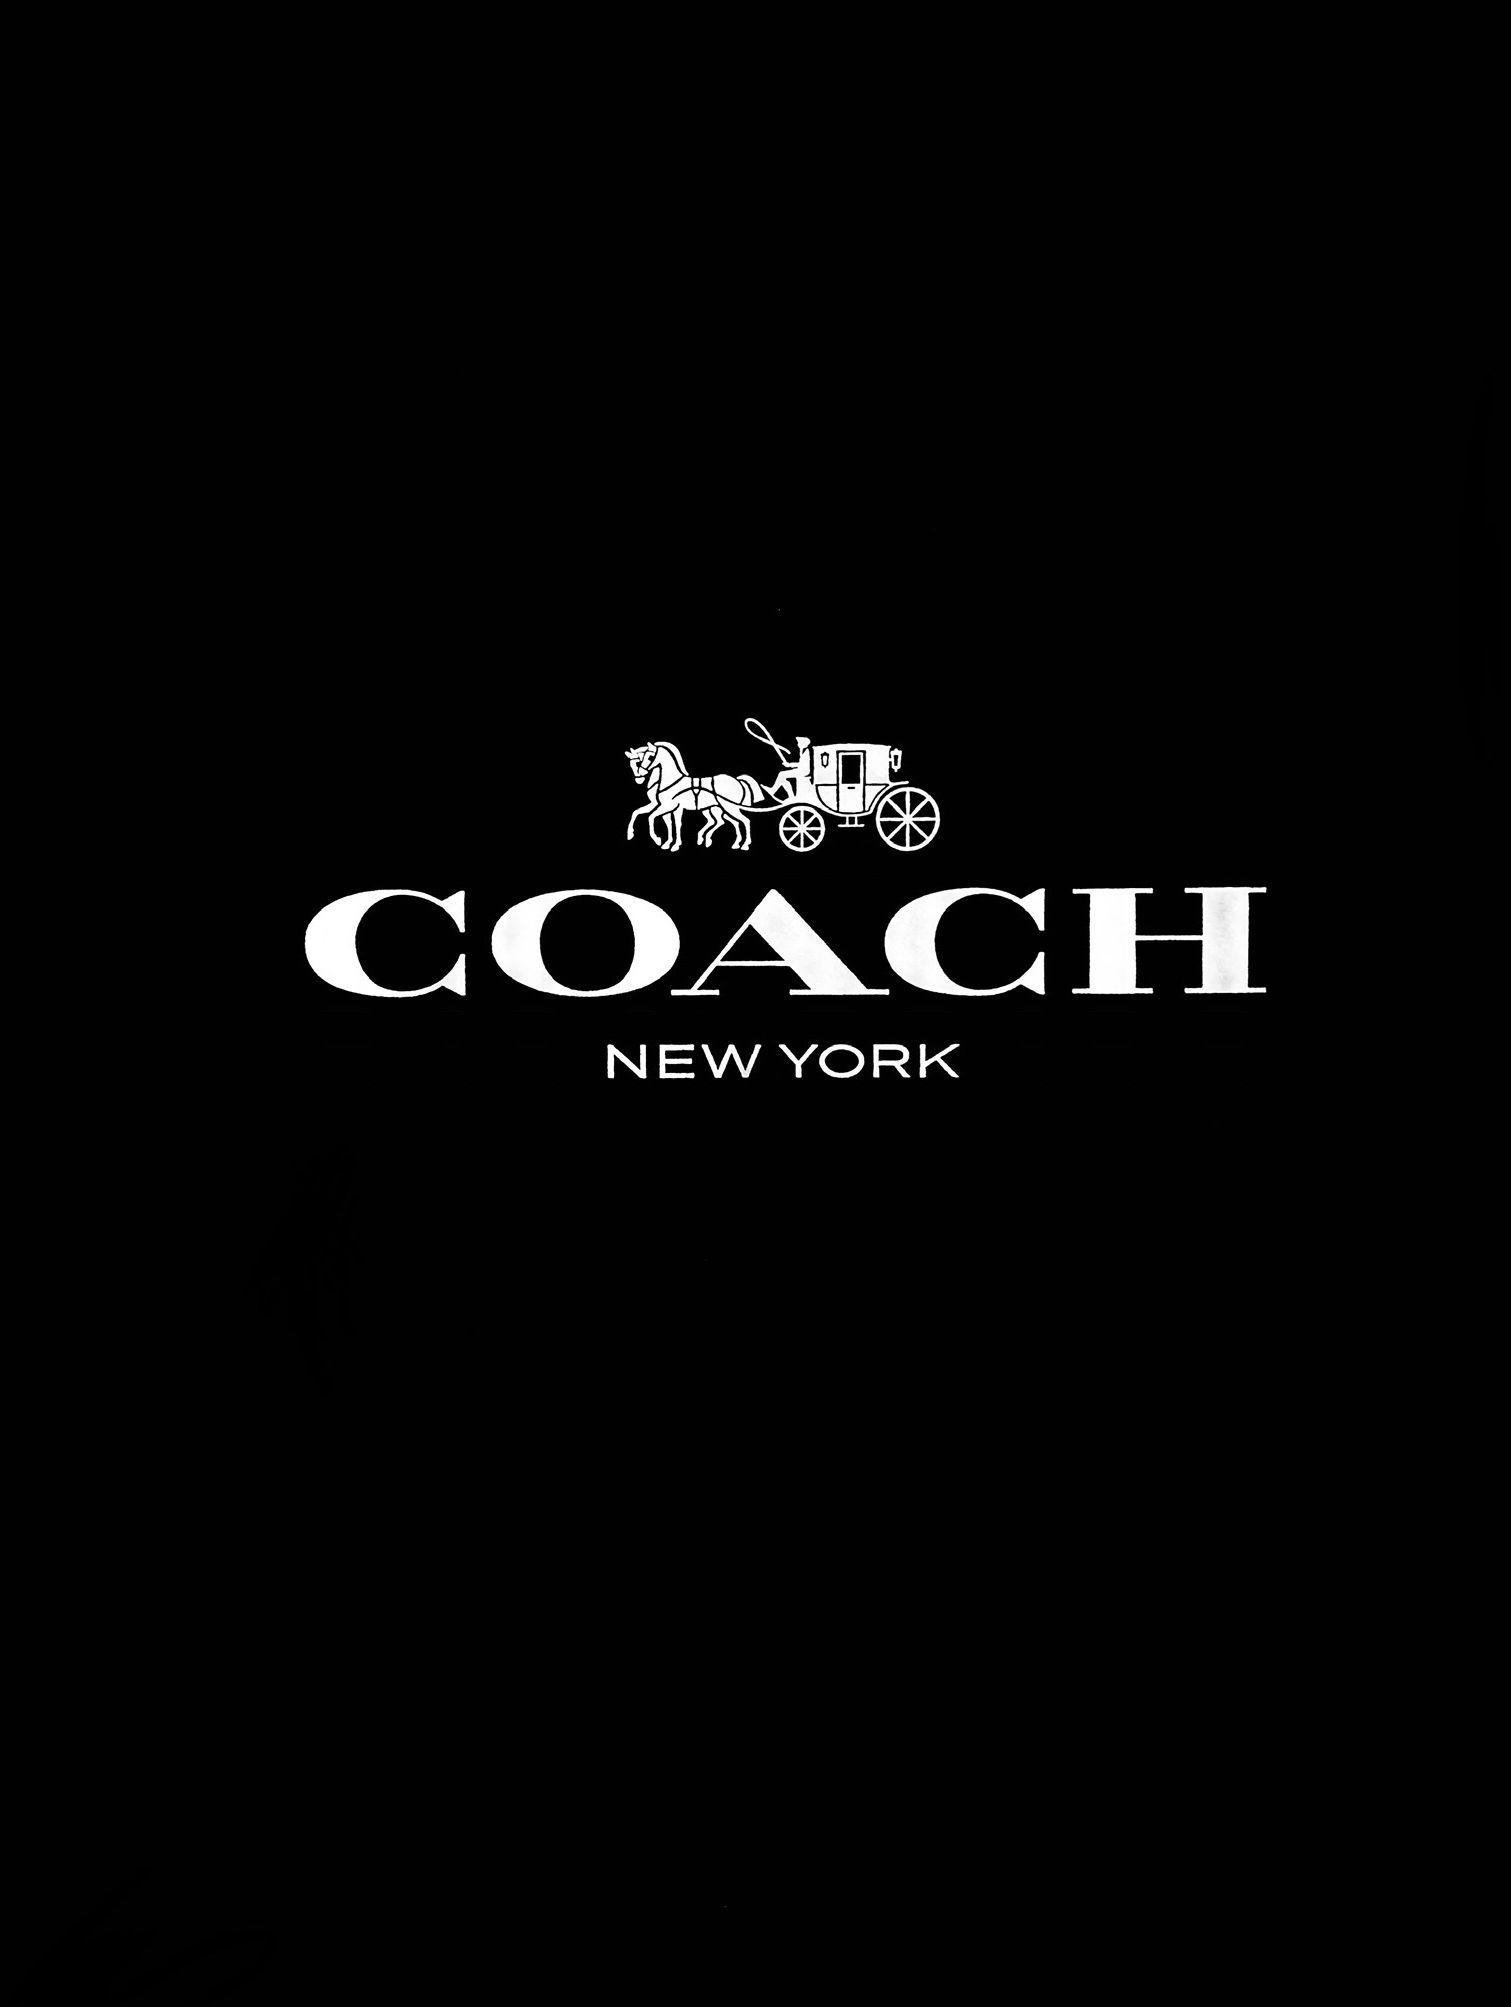 Coach Iphone Wallpapers Top Free Coach Iphone Backgrounds Wallpaperaccess